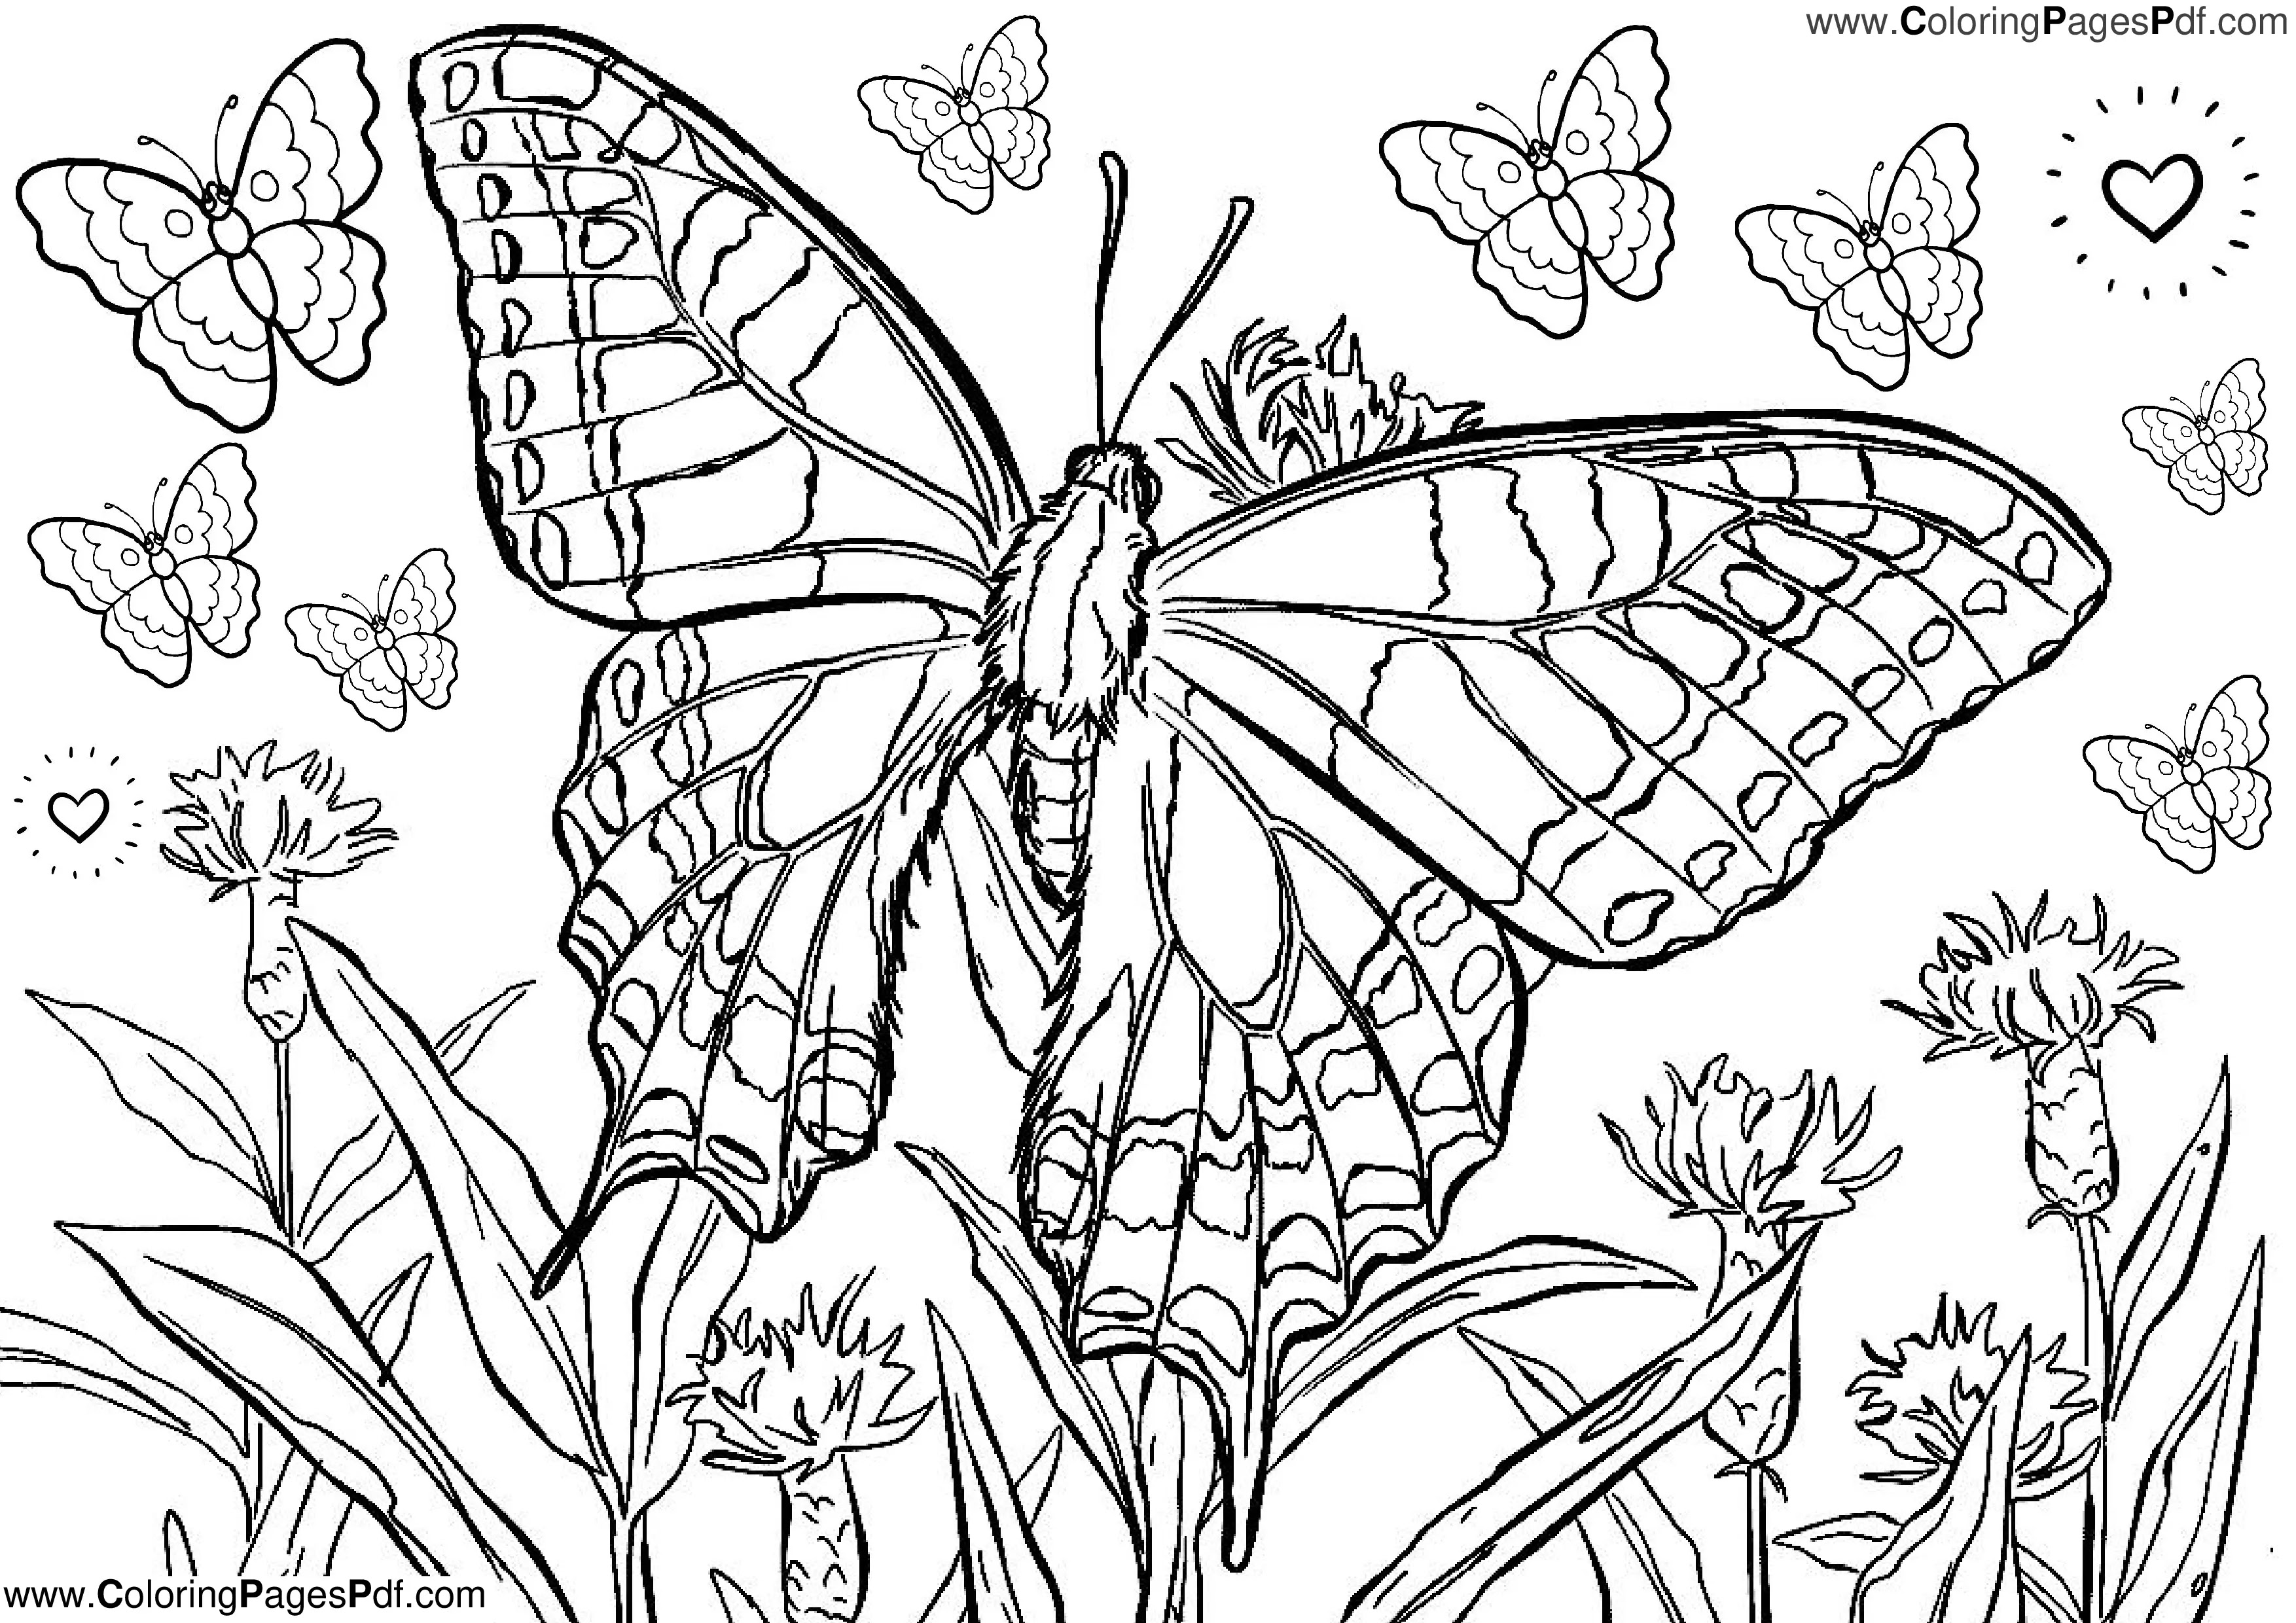 Butterfly coloring pages for adults